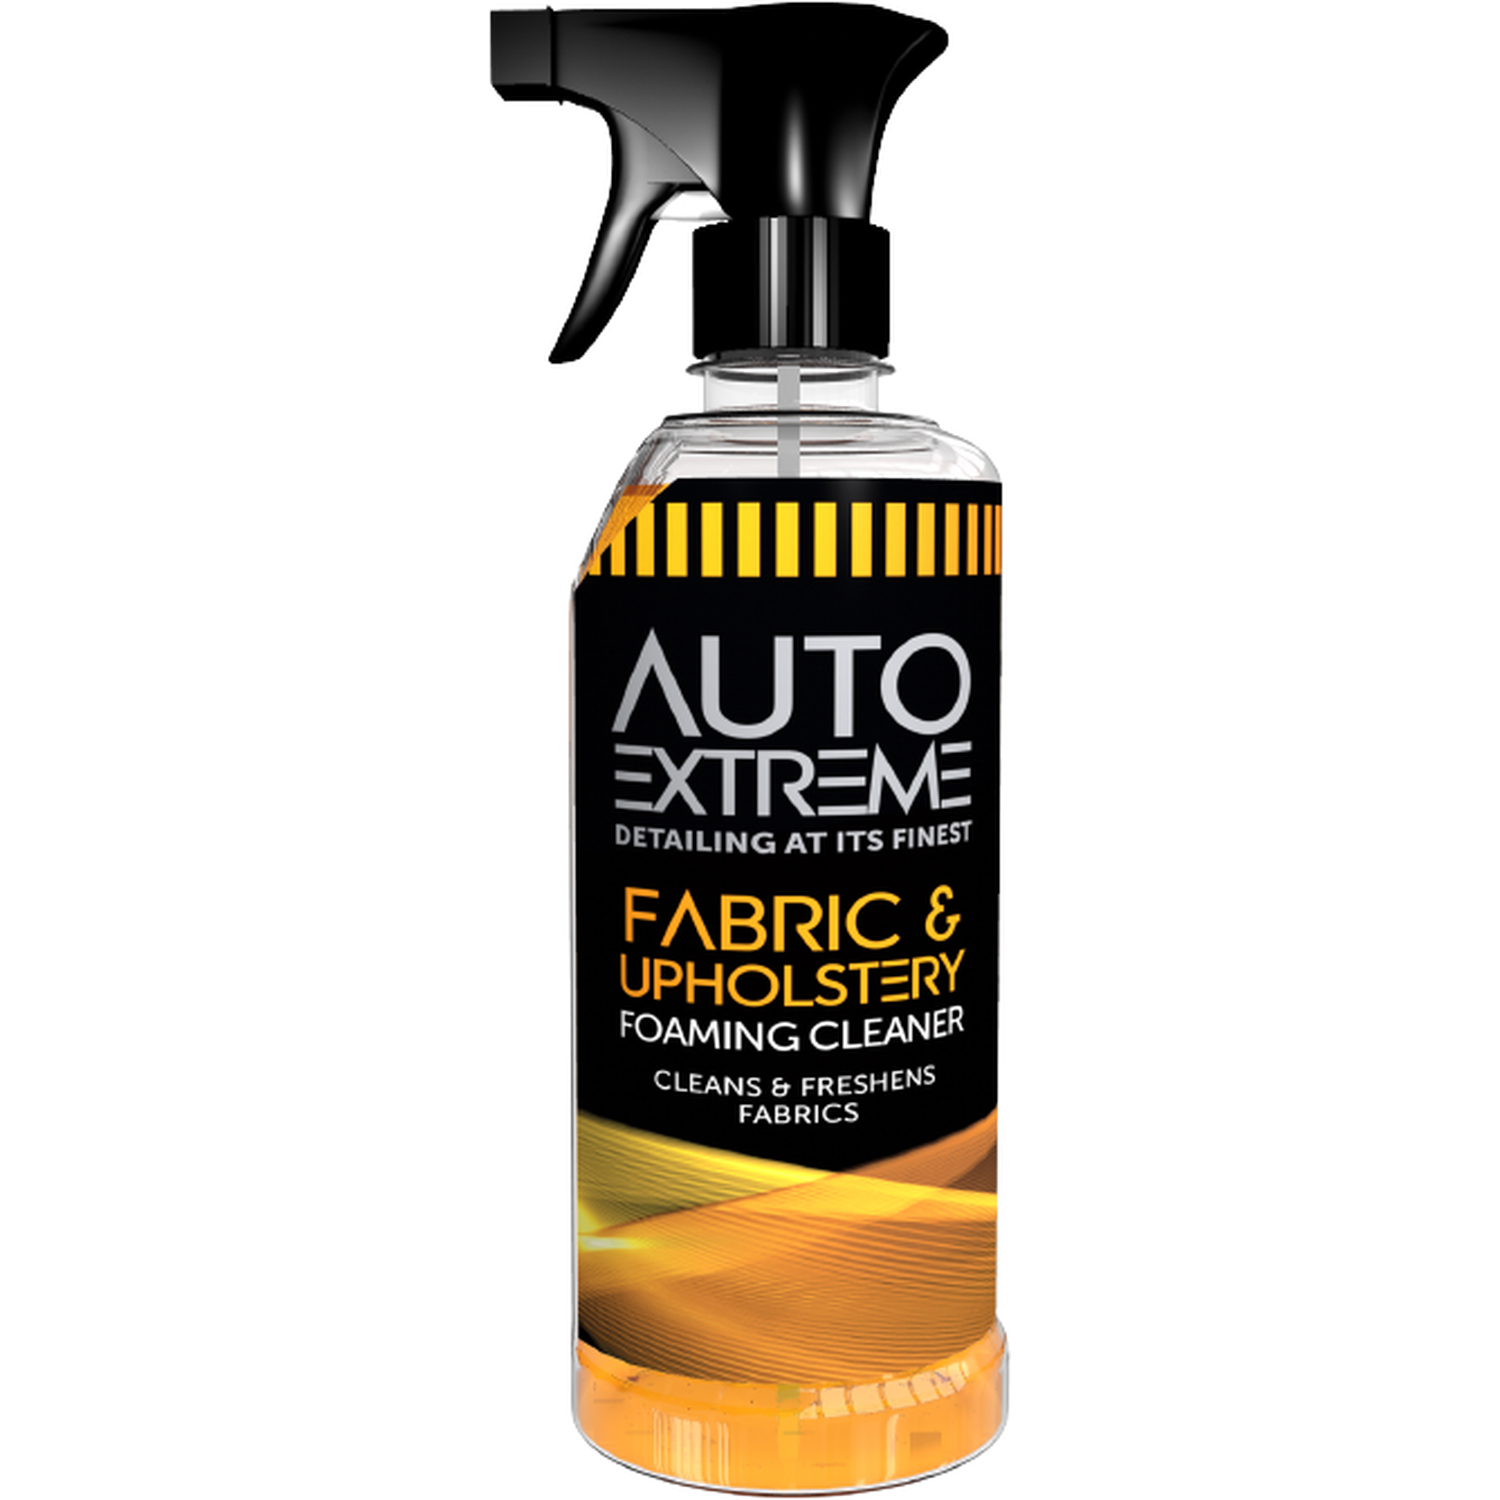 Auto Extreme Fabric and Upholstery Foaming Cleaner - Yellow Image